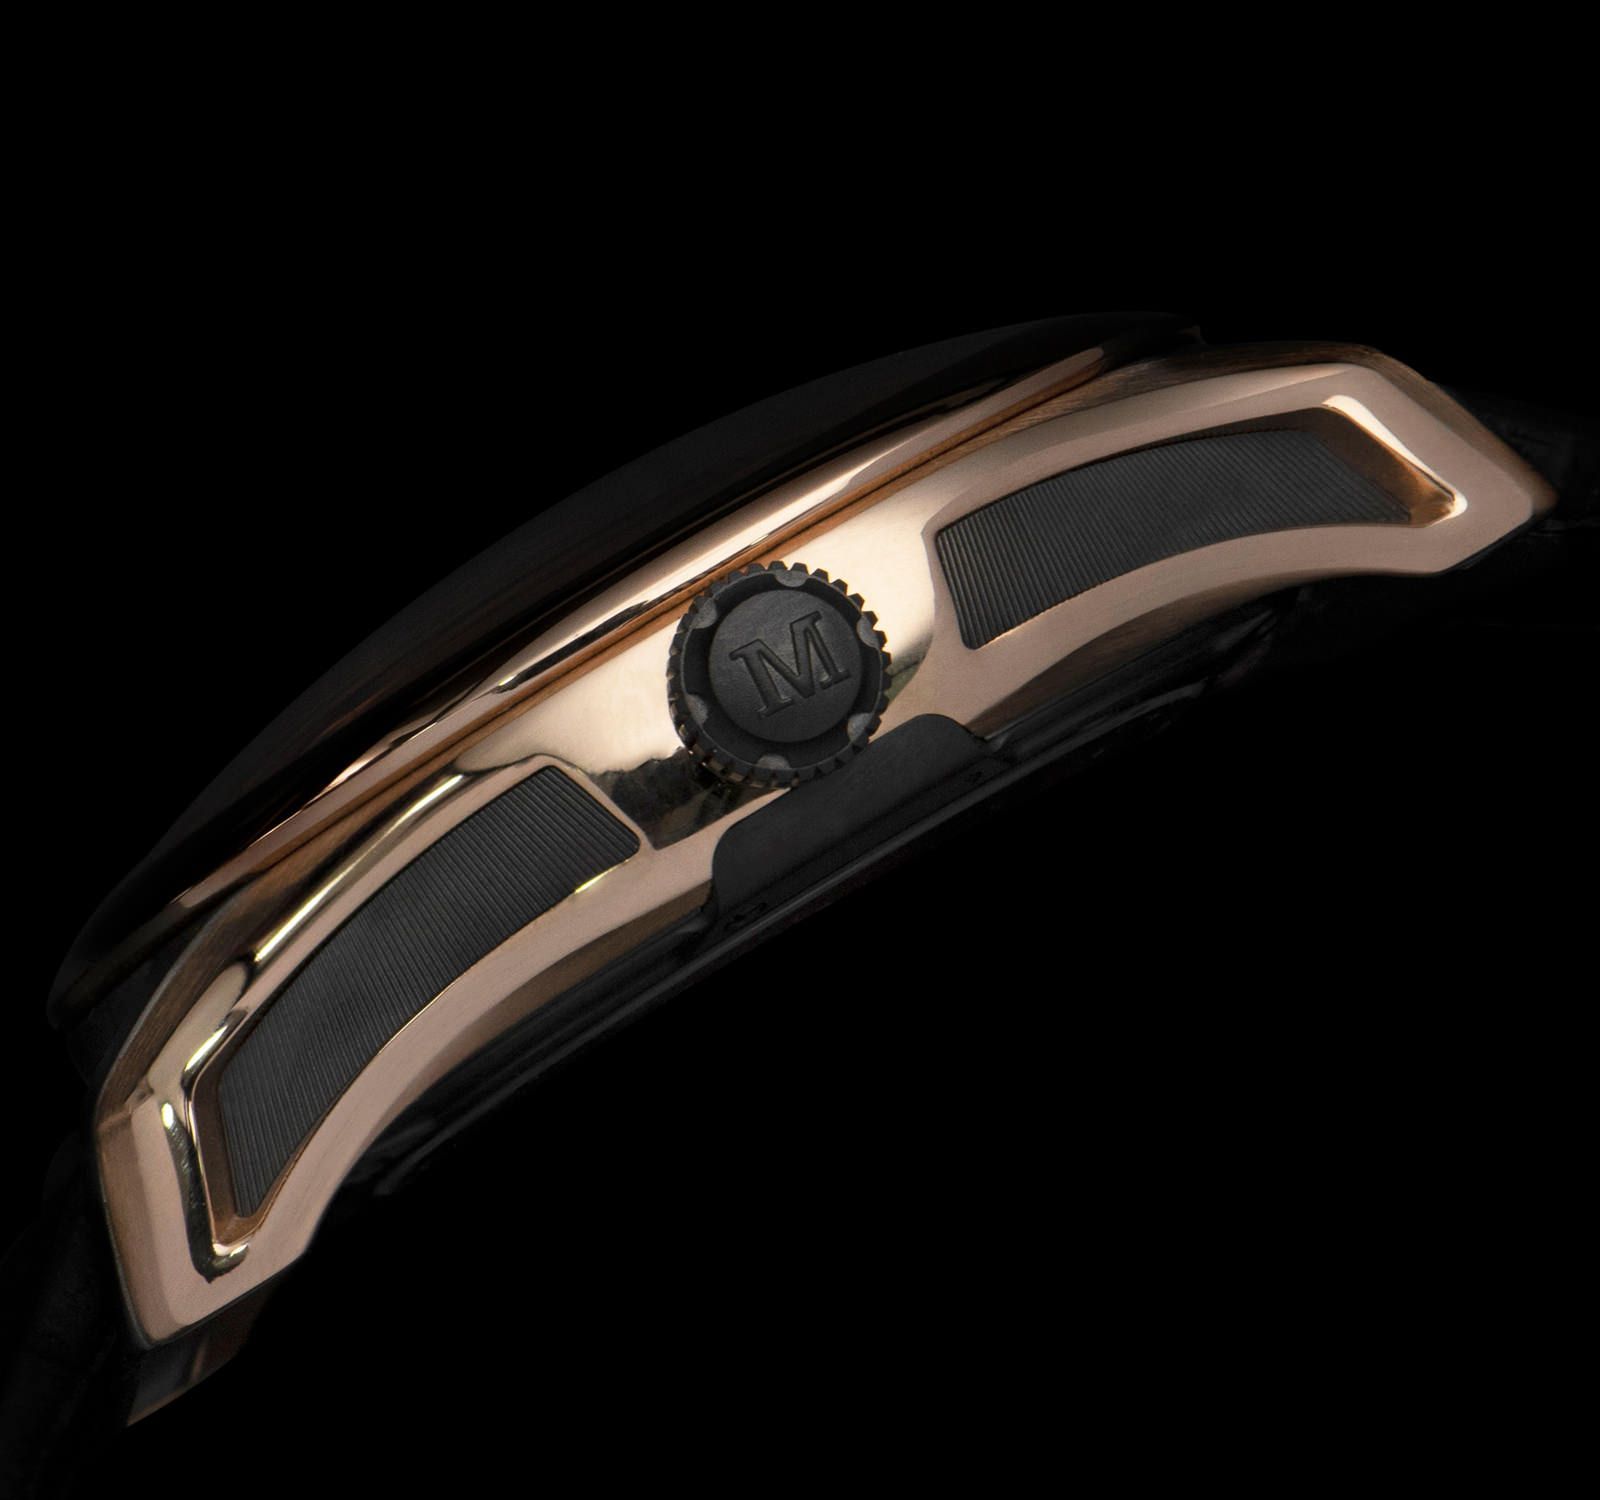 H. Moser & Cie. watches for Men